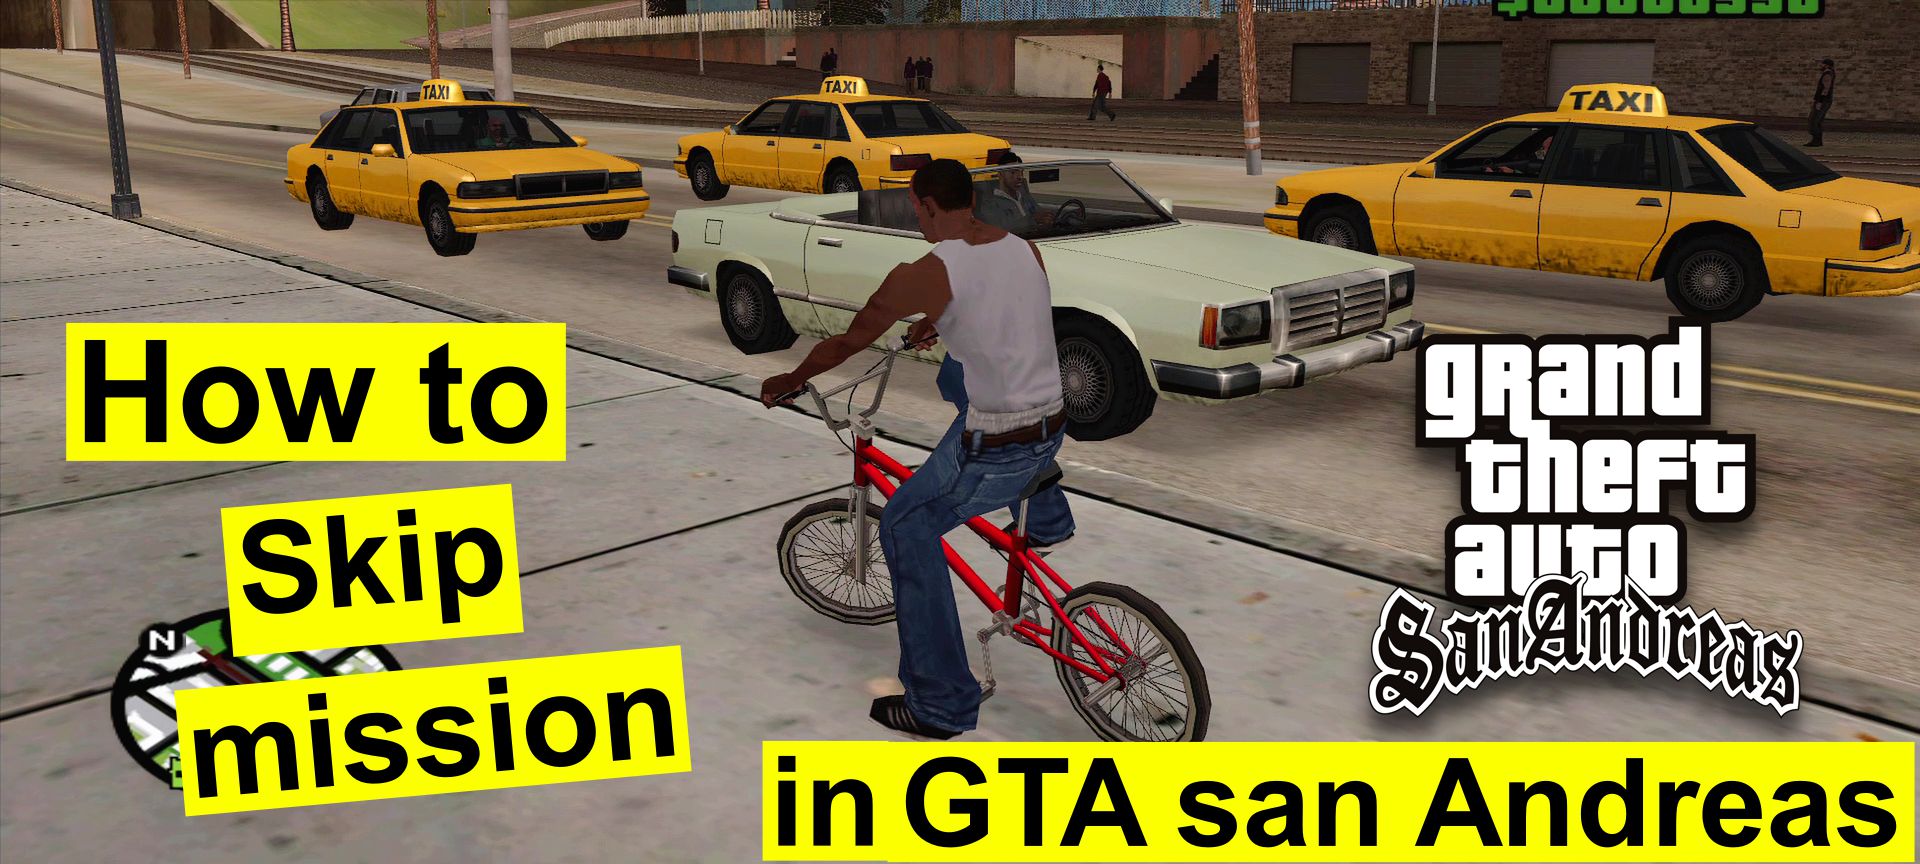 how to skip mission in GTA San Andreas PC Game